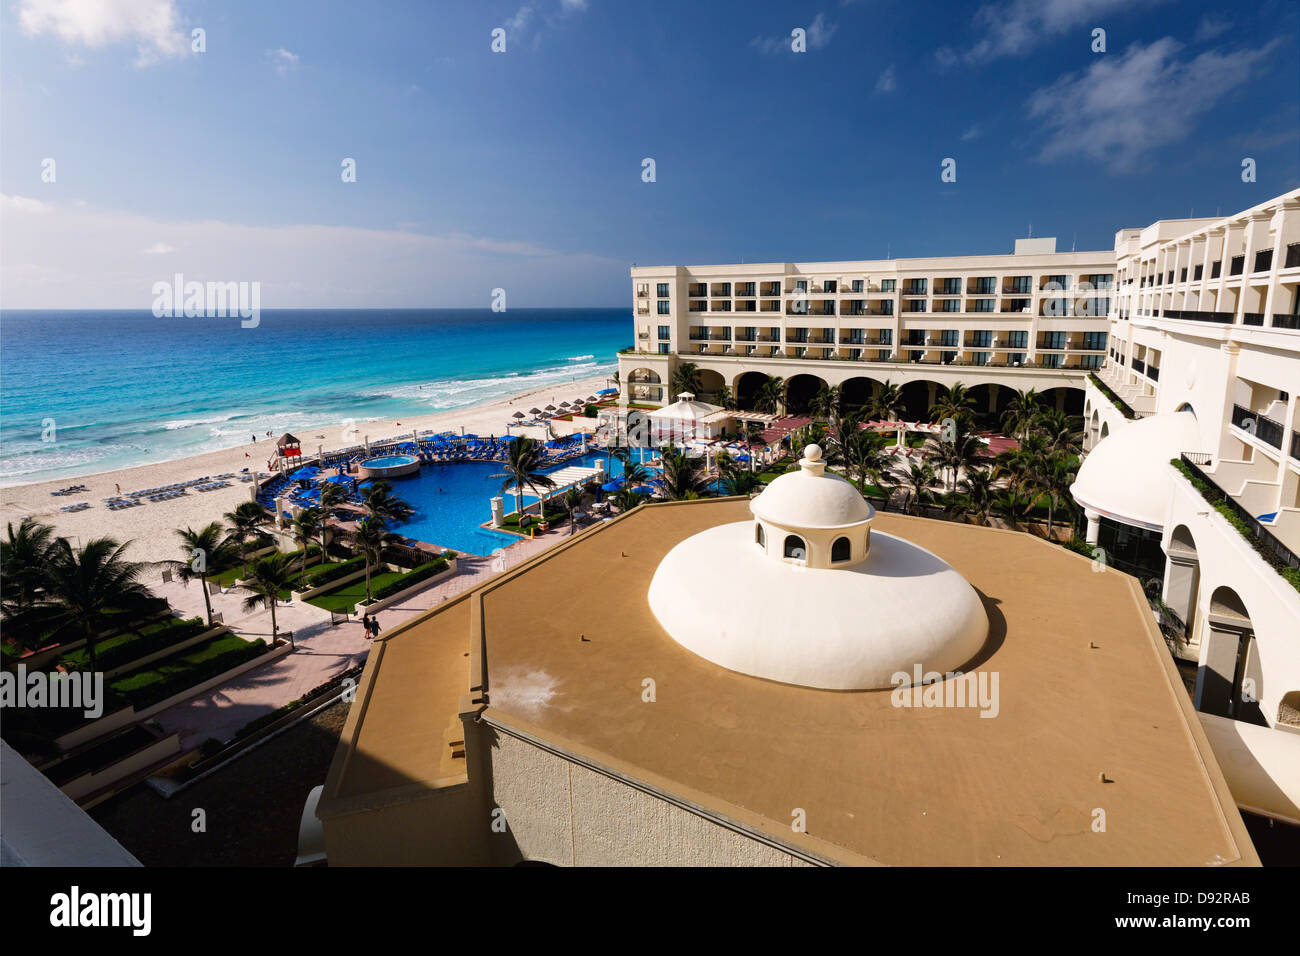 High Angle View of a Caribbean Resort with a Pool, Zona Hotelera, Cancun, Mexico Stock Photo